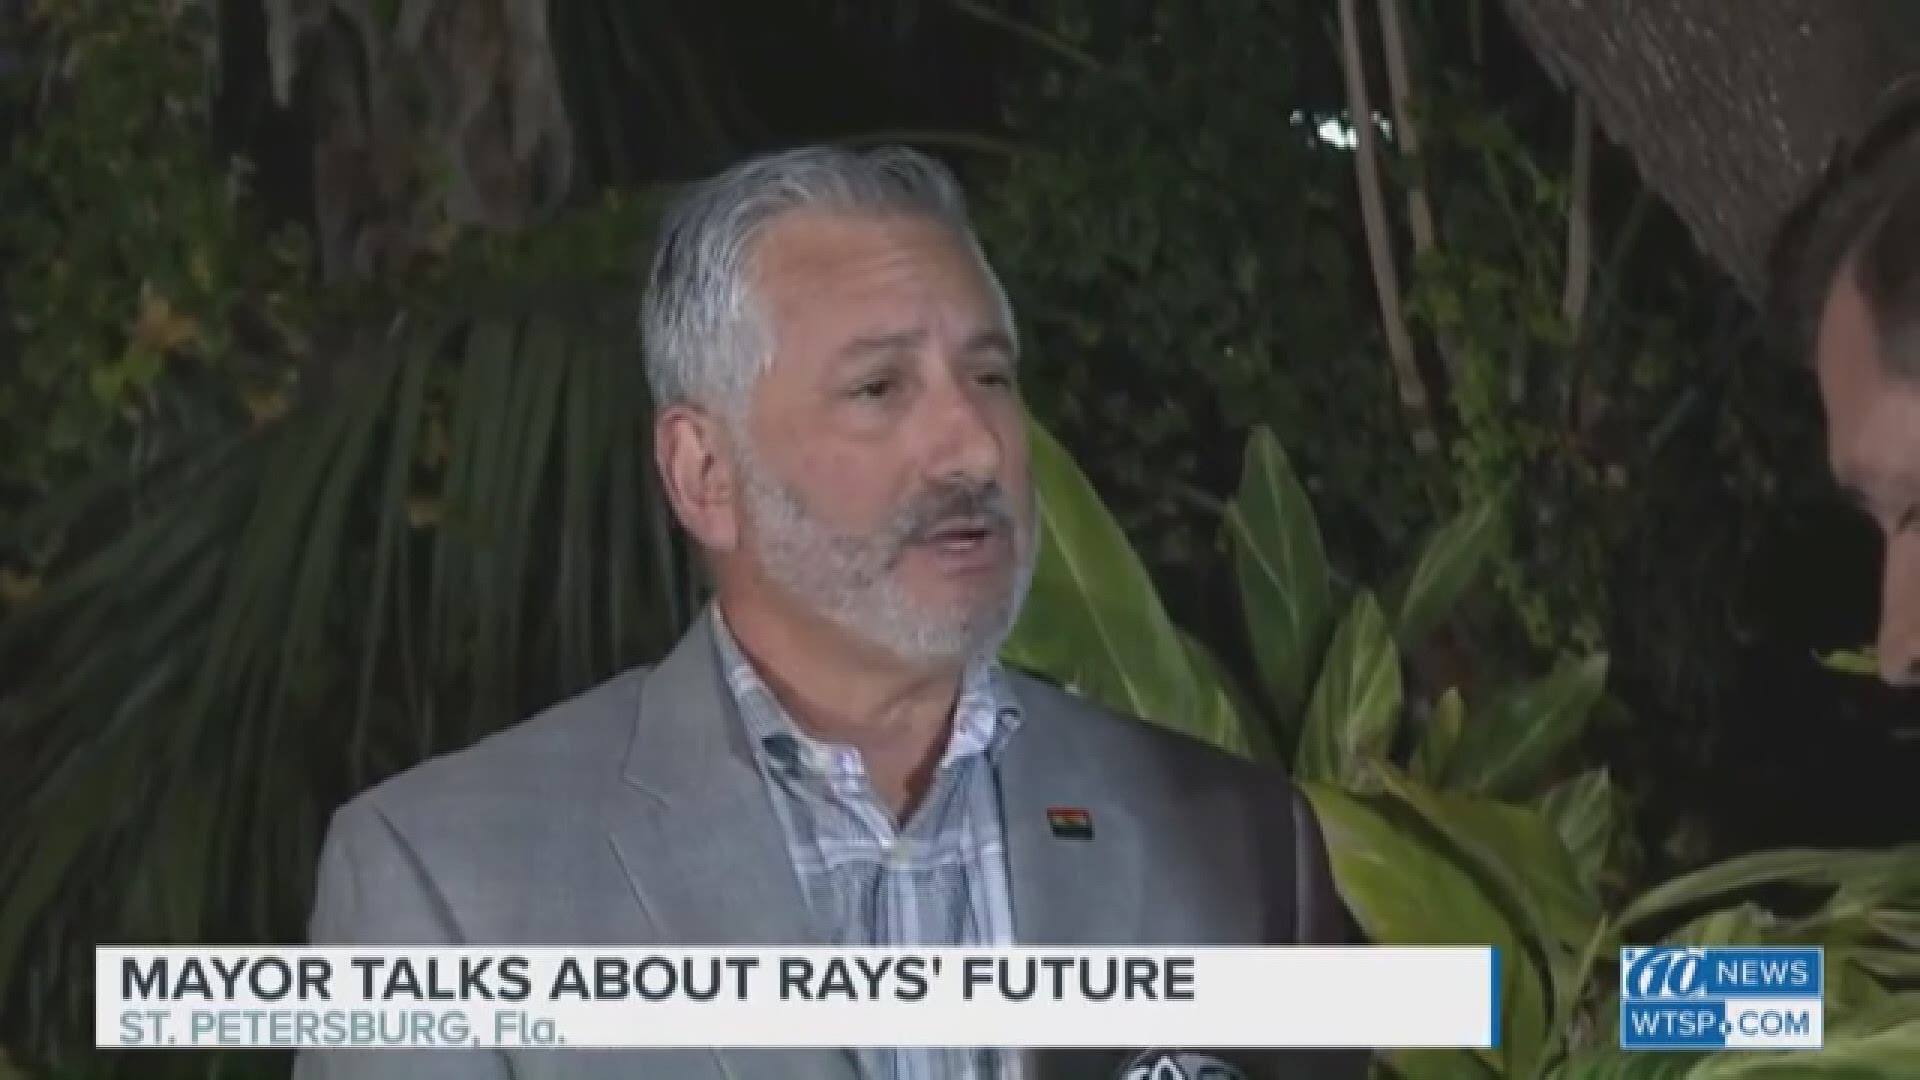 Months after the Tampa Bay Rays threw a curveball at ongoing stadium negotiations, Mayor Rick Kriseman says the team’s proposal to ‘share’ the season is a no-go.